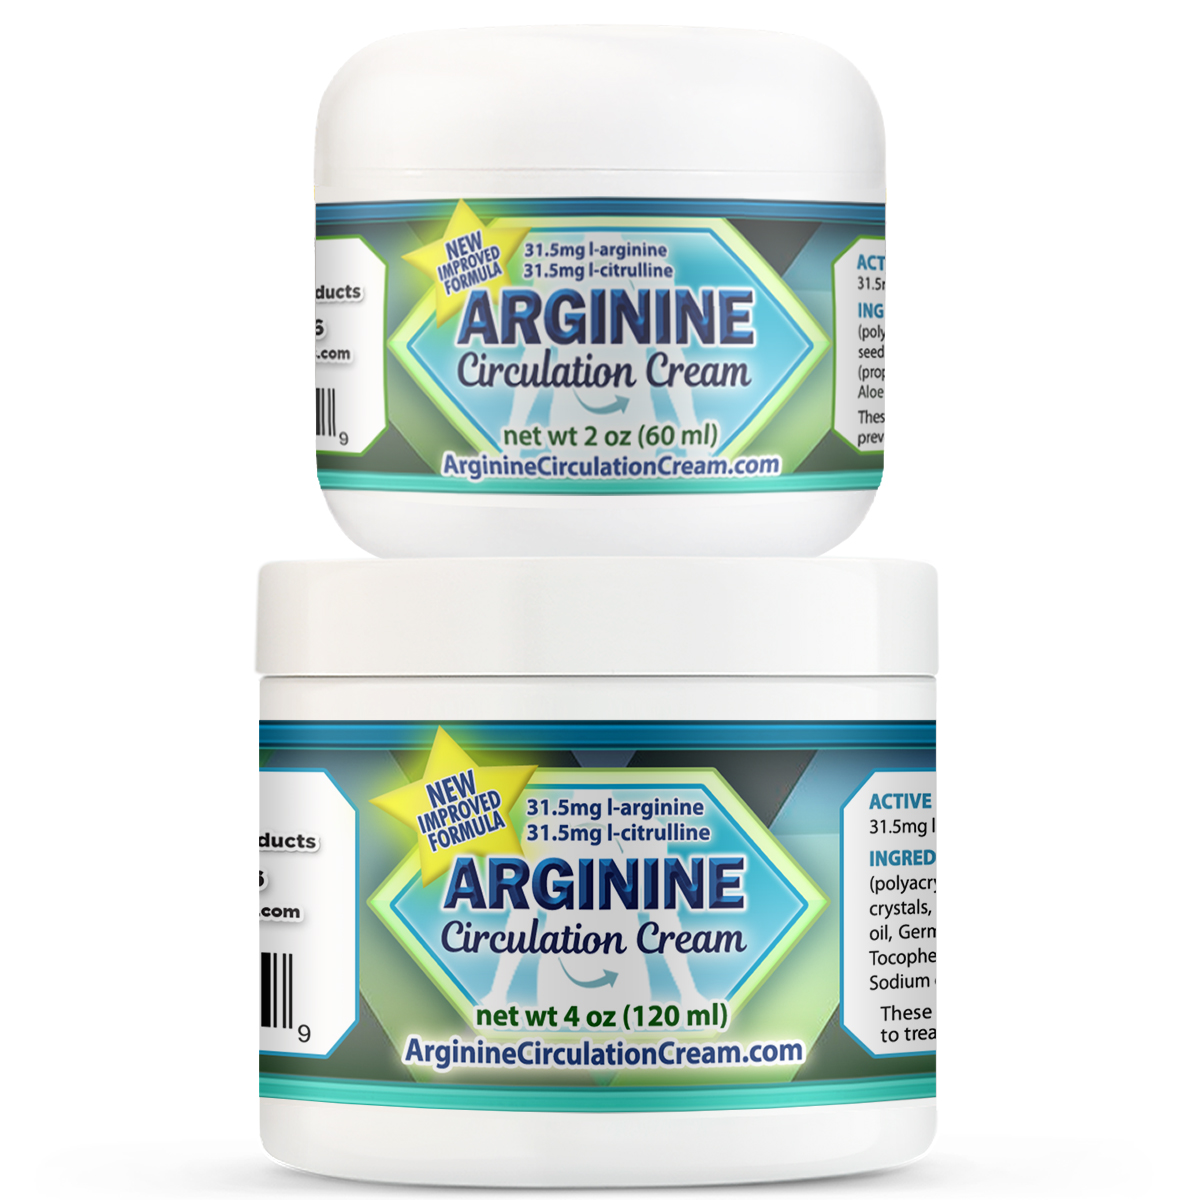 Experience the benefits of Arginine Circulation Cream! - New Hampshire - Manchester ID1546306 1